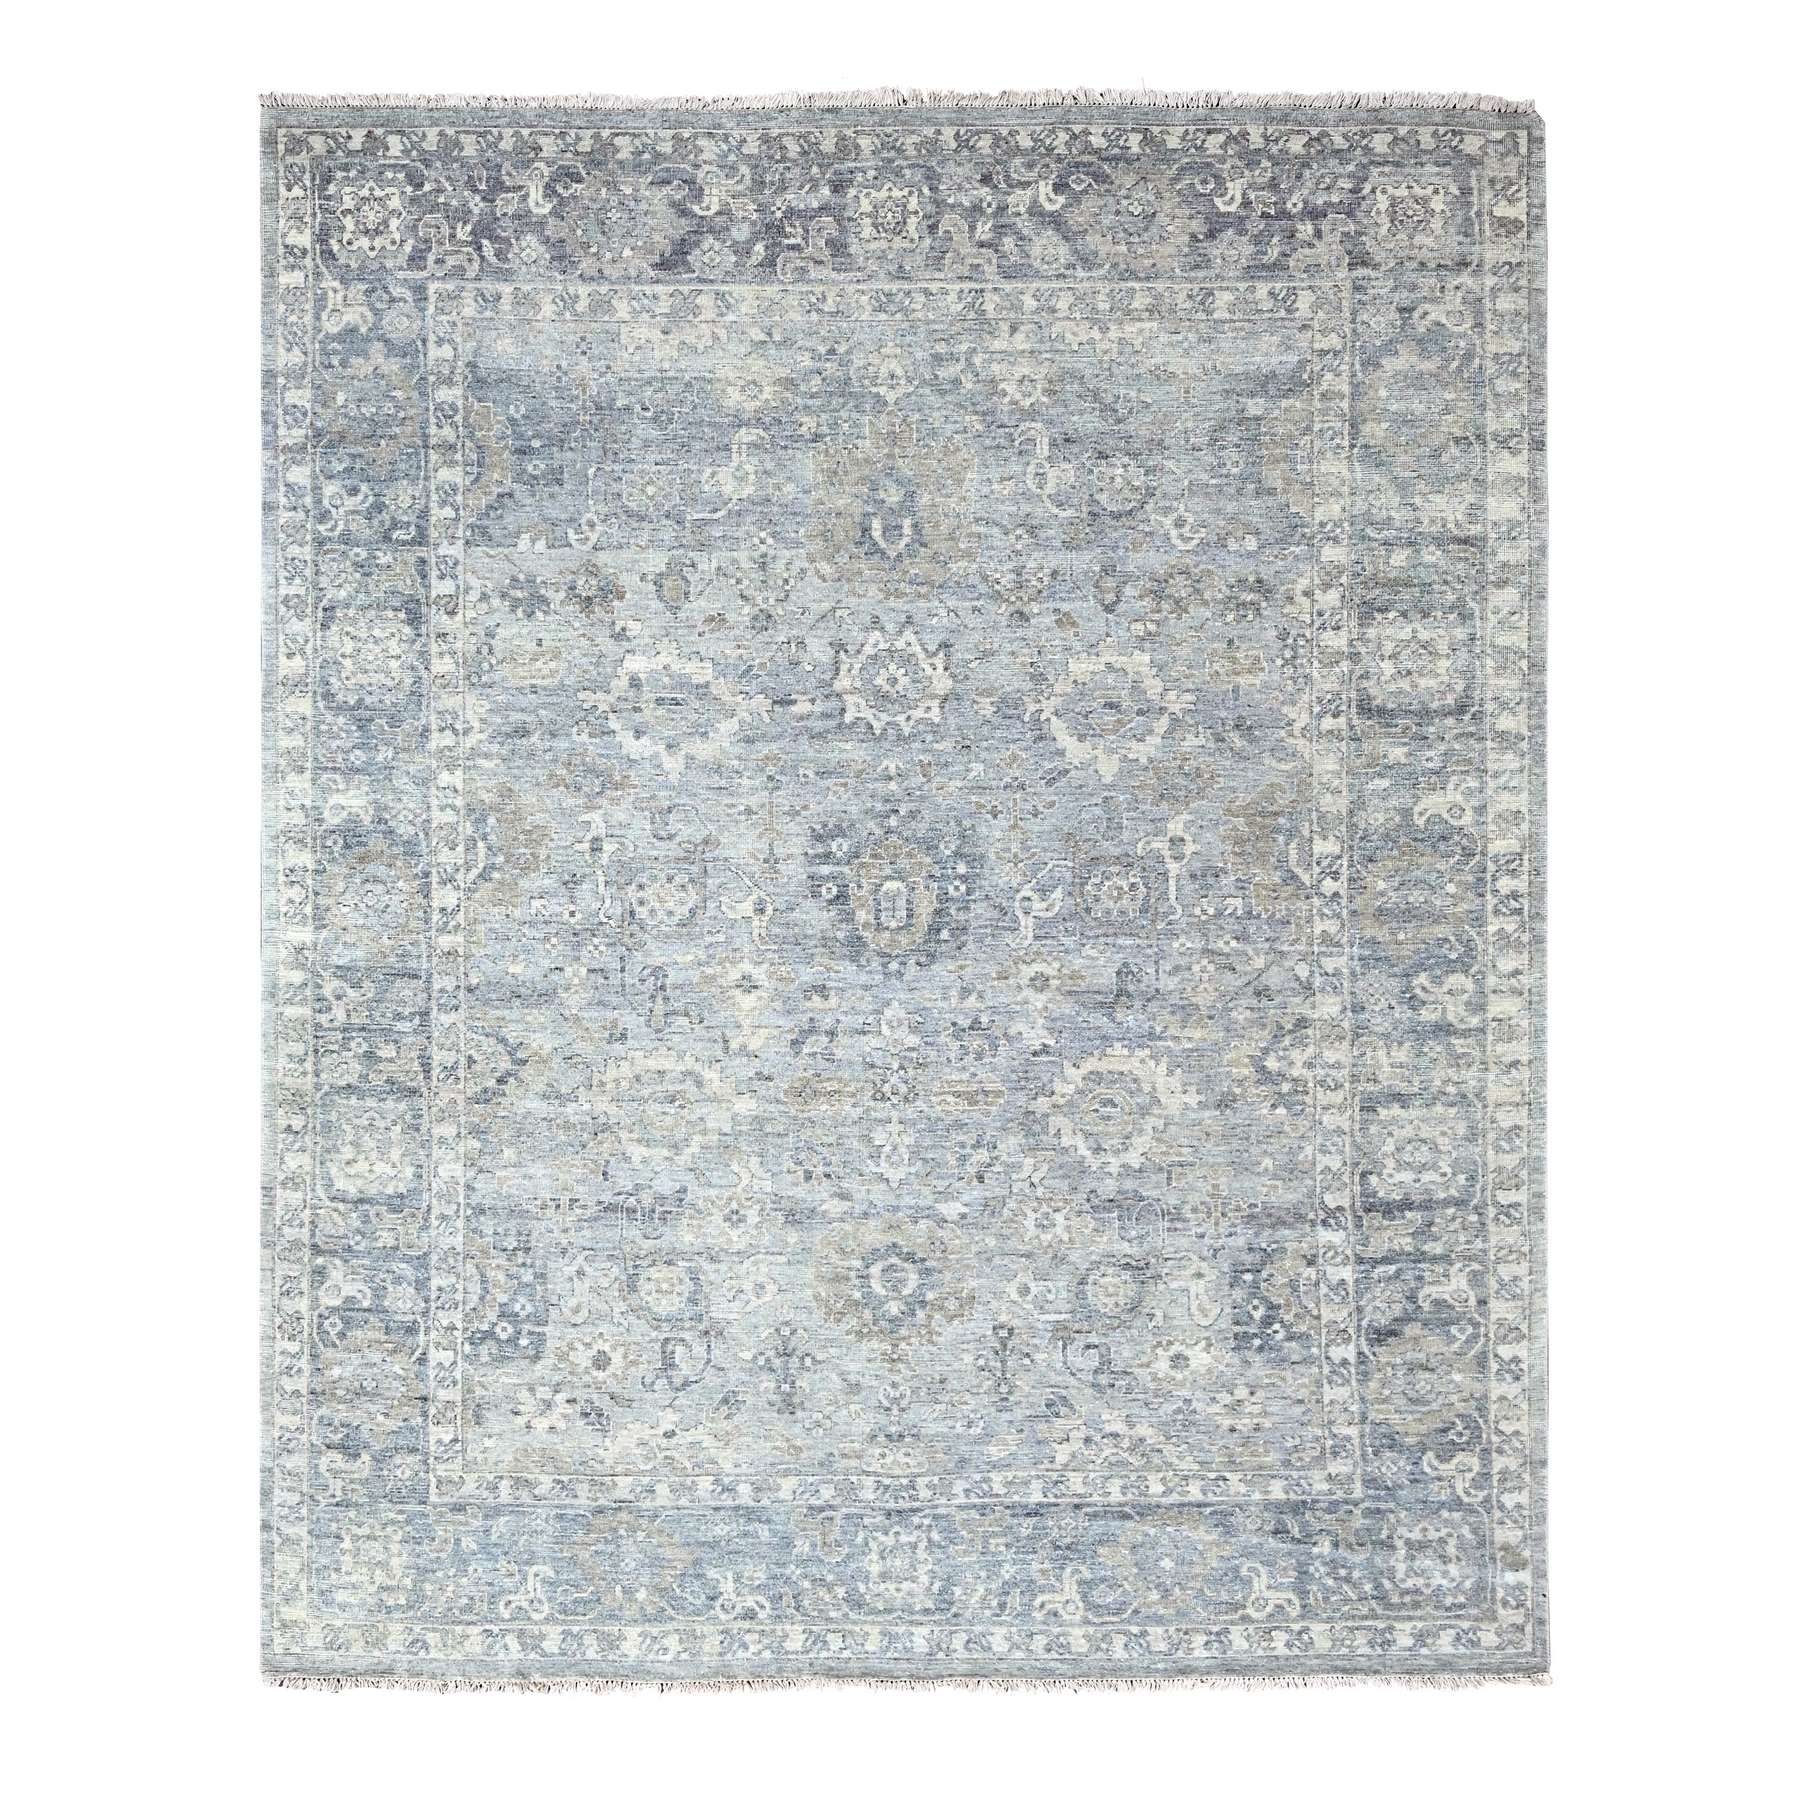 Pelican and Delray Gray Distressed, Zero Pile, Shaved Thin, Distinct Abrash Karajeh Heriz Design, Vibrant Wool, Hand Knotted Oriental Rug